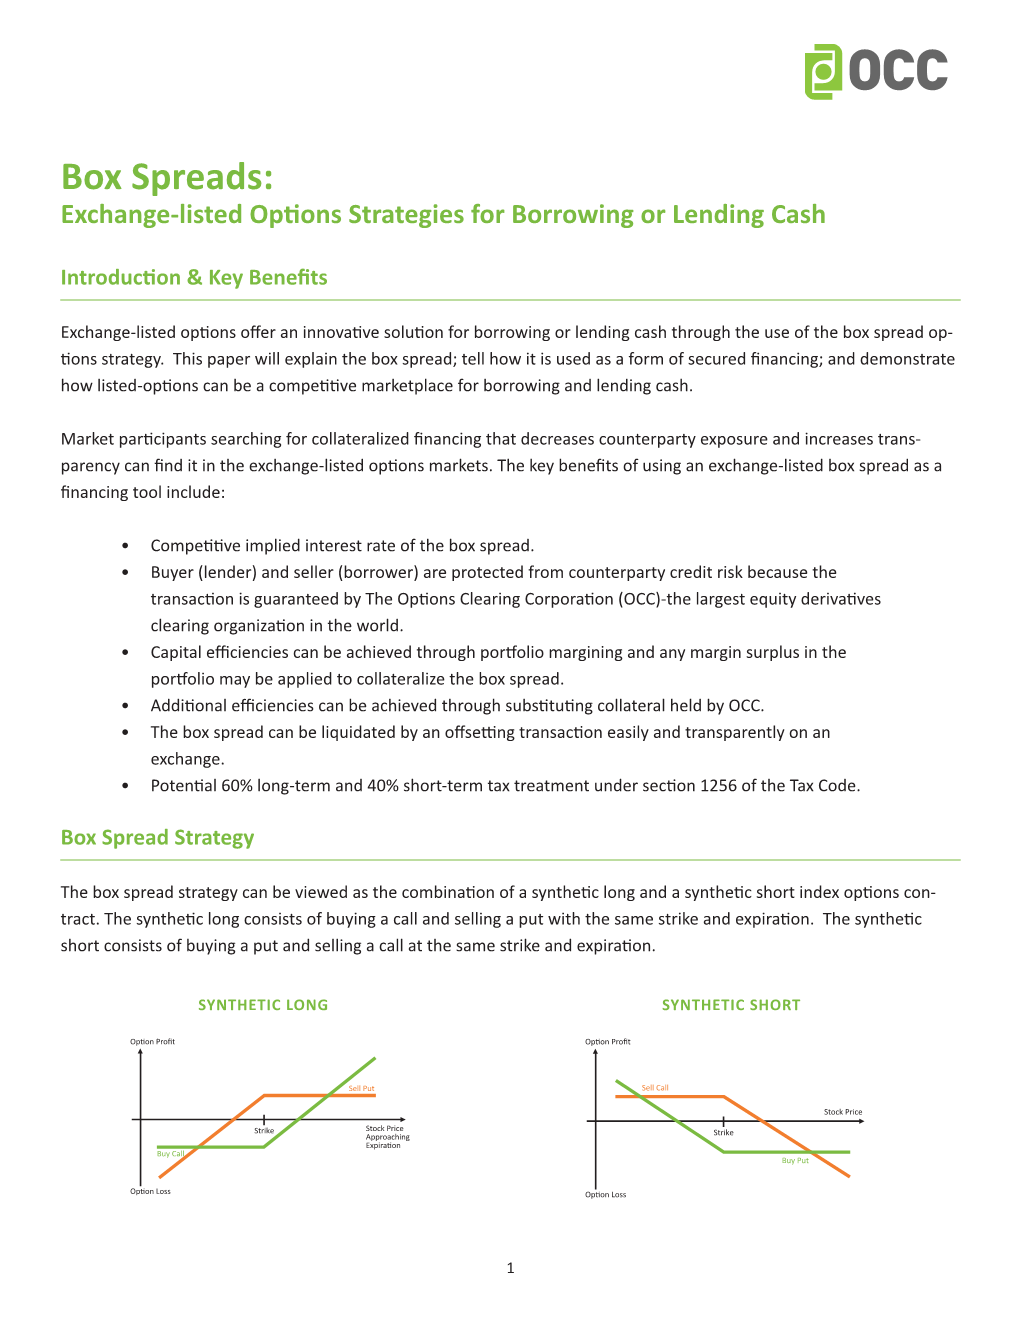 Box Spreads: Exchange-Listed Options Strategies for Borrowing Or Lending Cash